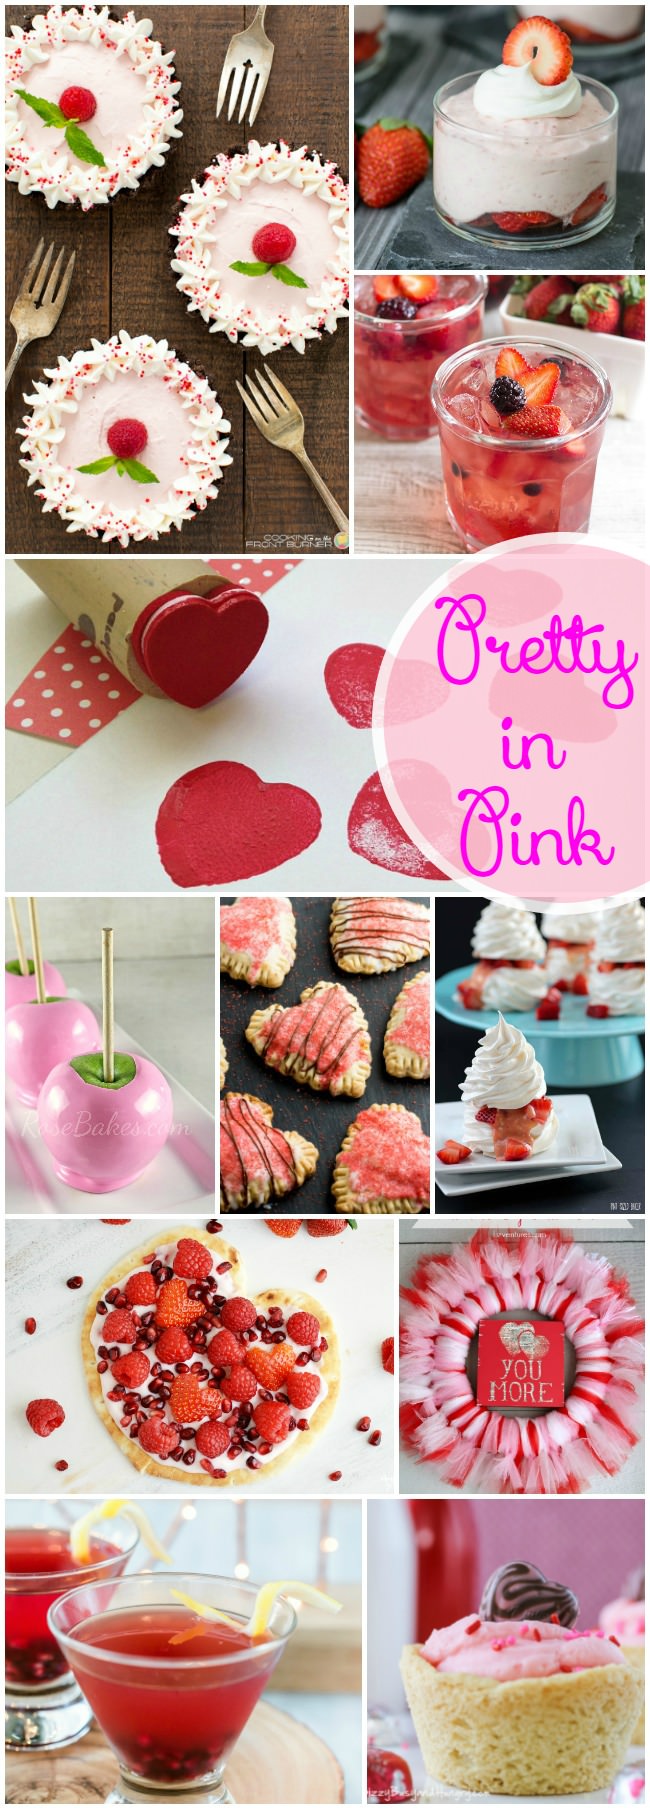 This Pretty in Pink Valentine's Day Collection is just what we need right now! Pretty pink snacks, drinks, and crafts that Cupid would approve of.